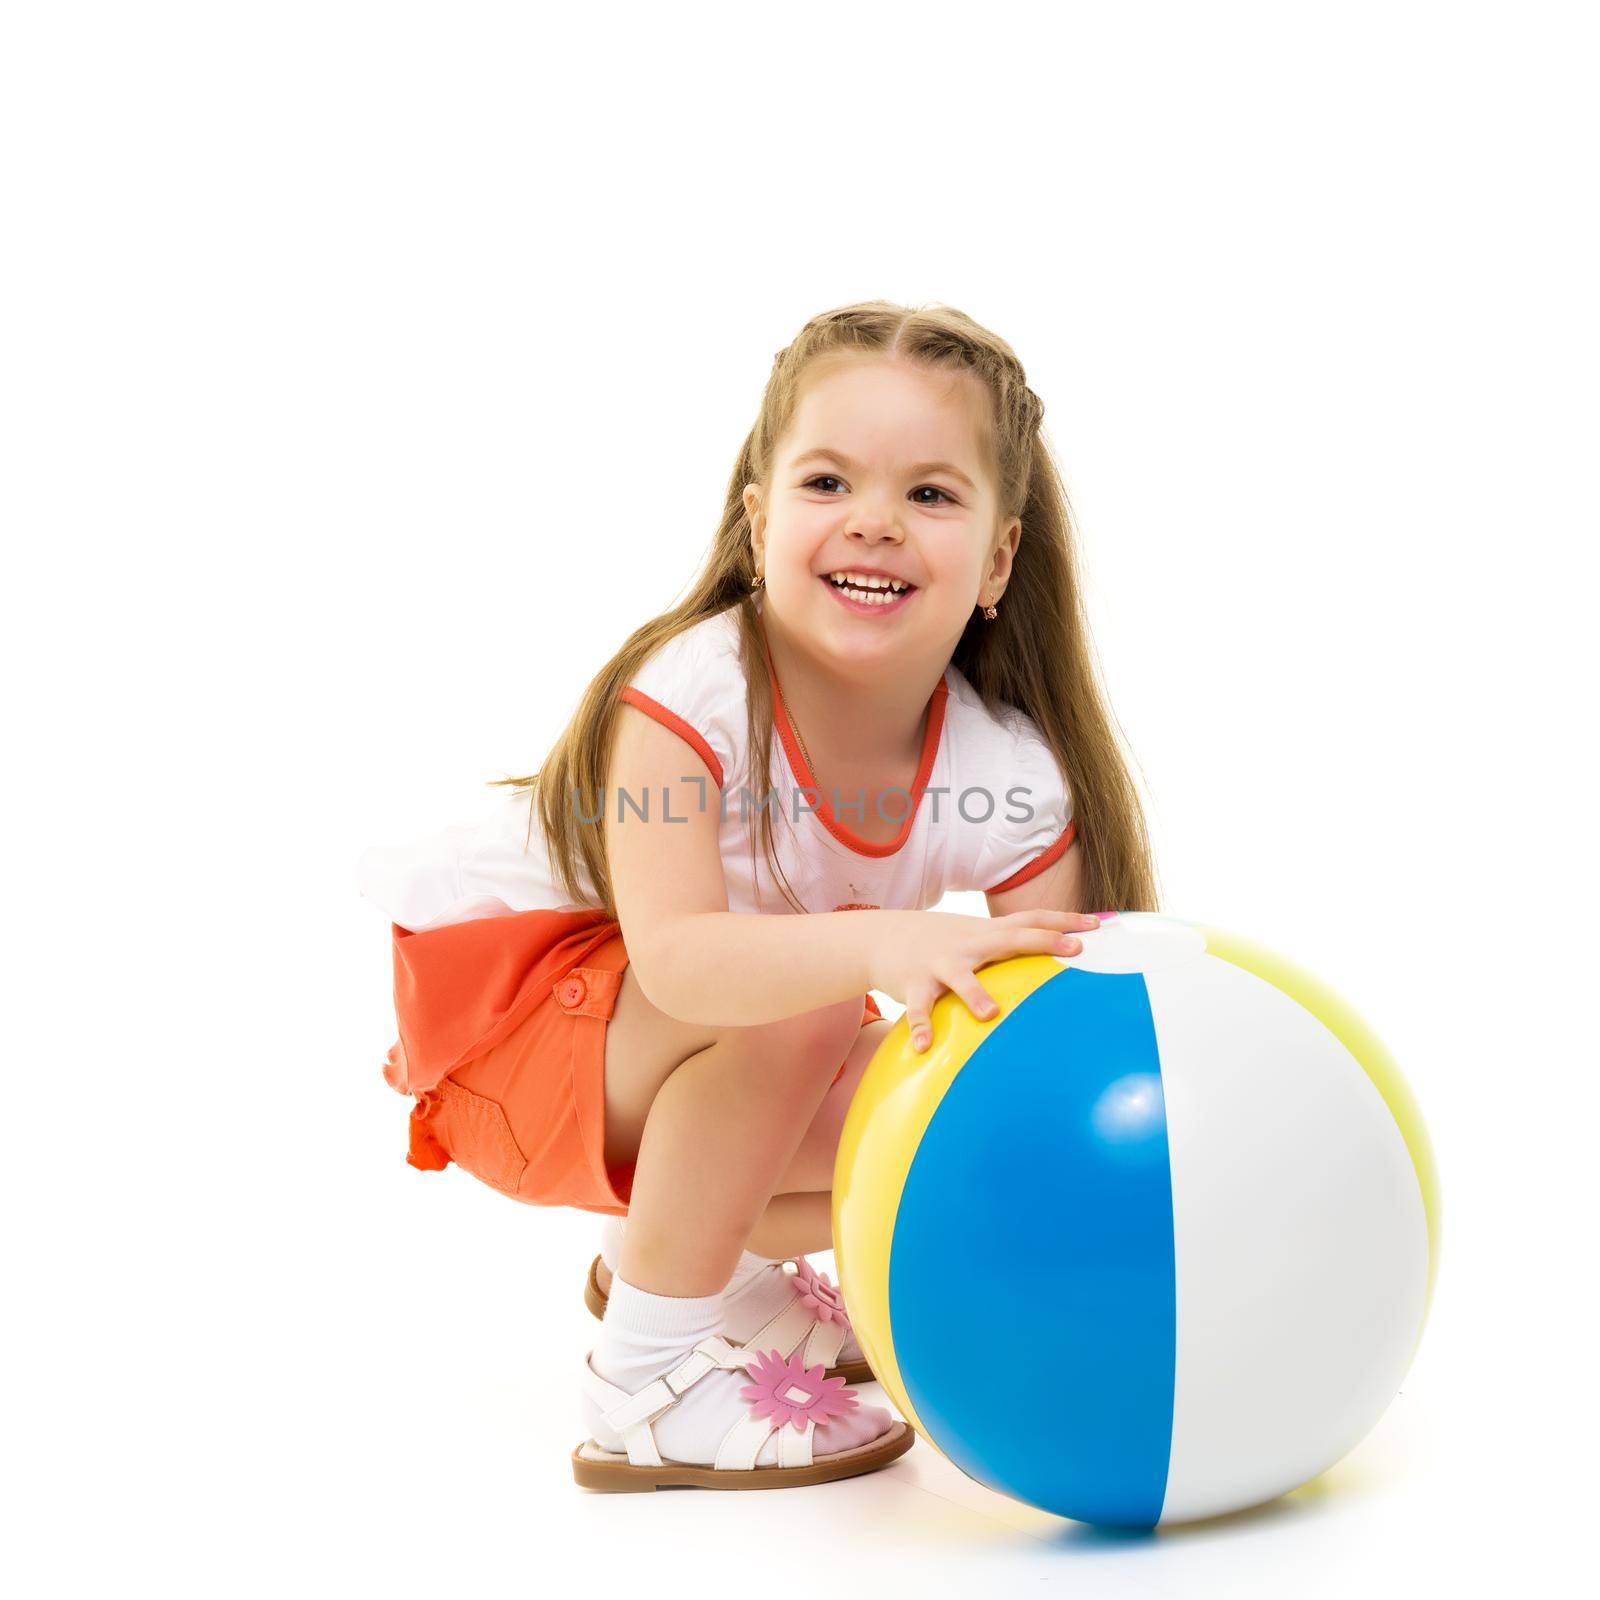 A good girl is playing with a big inflatable ball. The concept of a happy childhood, recreation in nature, exercise. Isolated on white background.